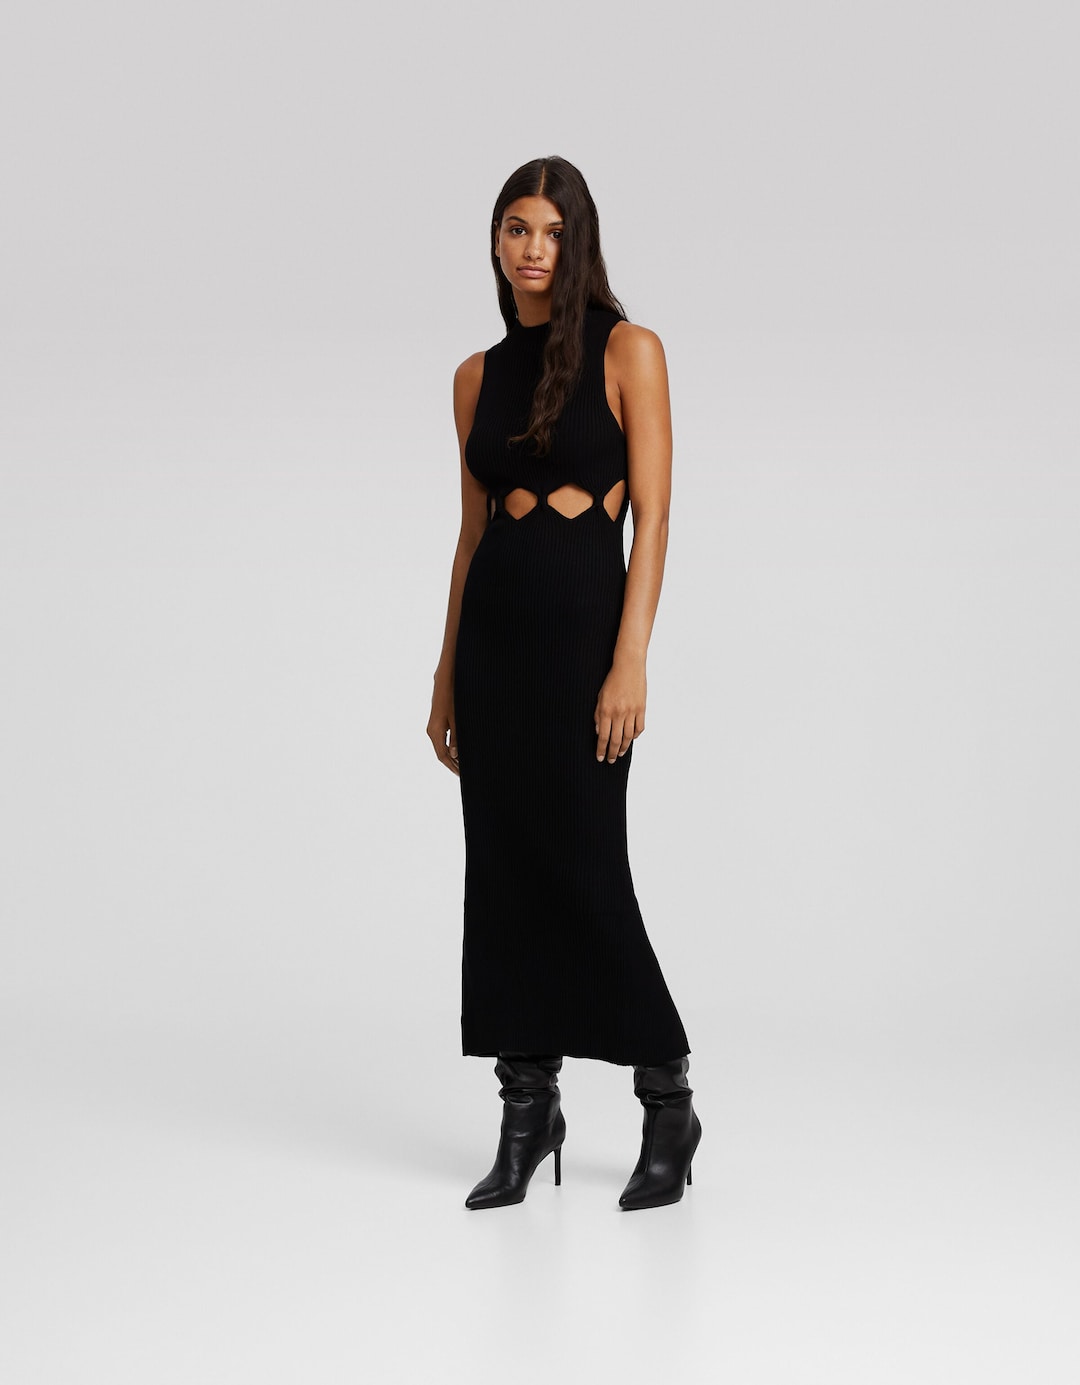 Women’s Long and Short Dresses | New Collection | BERSHKA